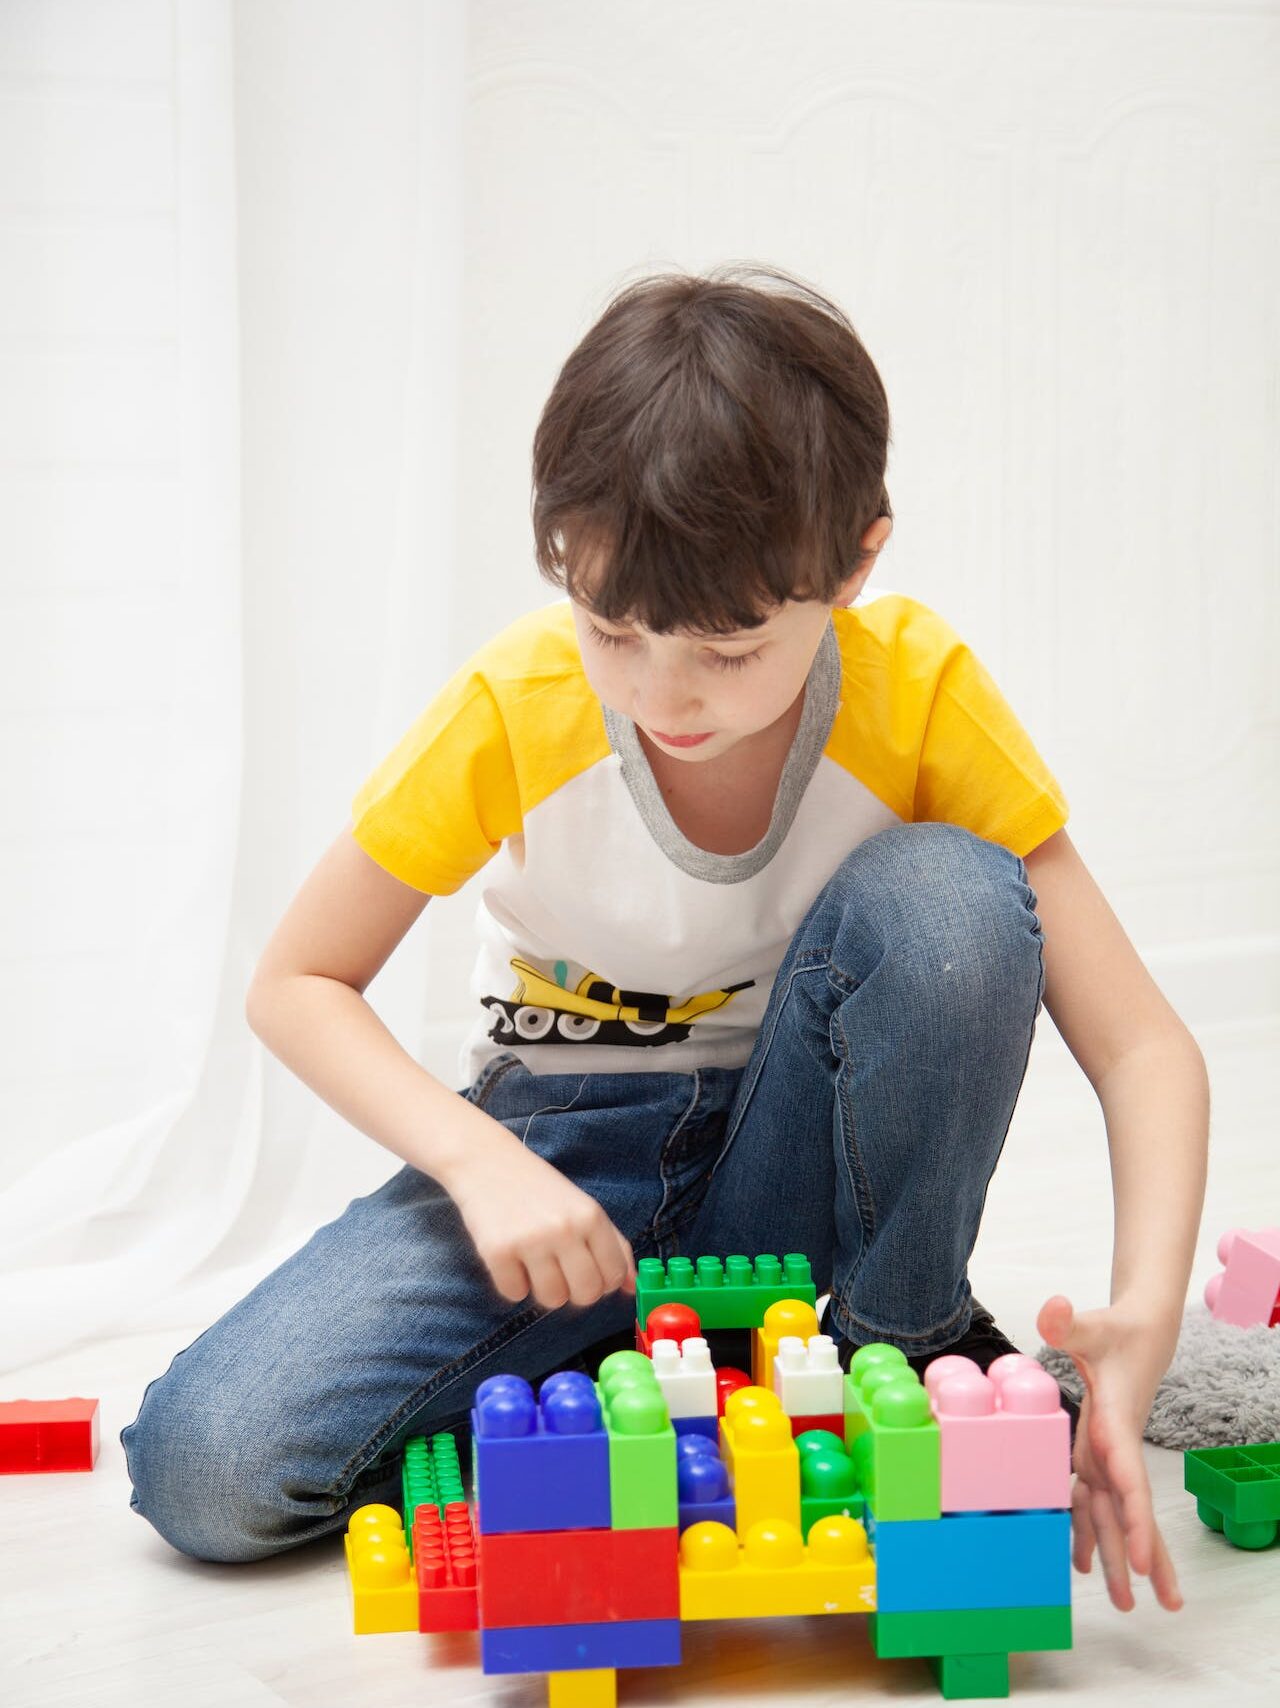 LEGO therapy aimed to create an effective social skills program applicable in various settings.